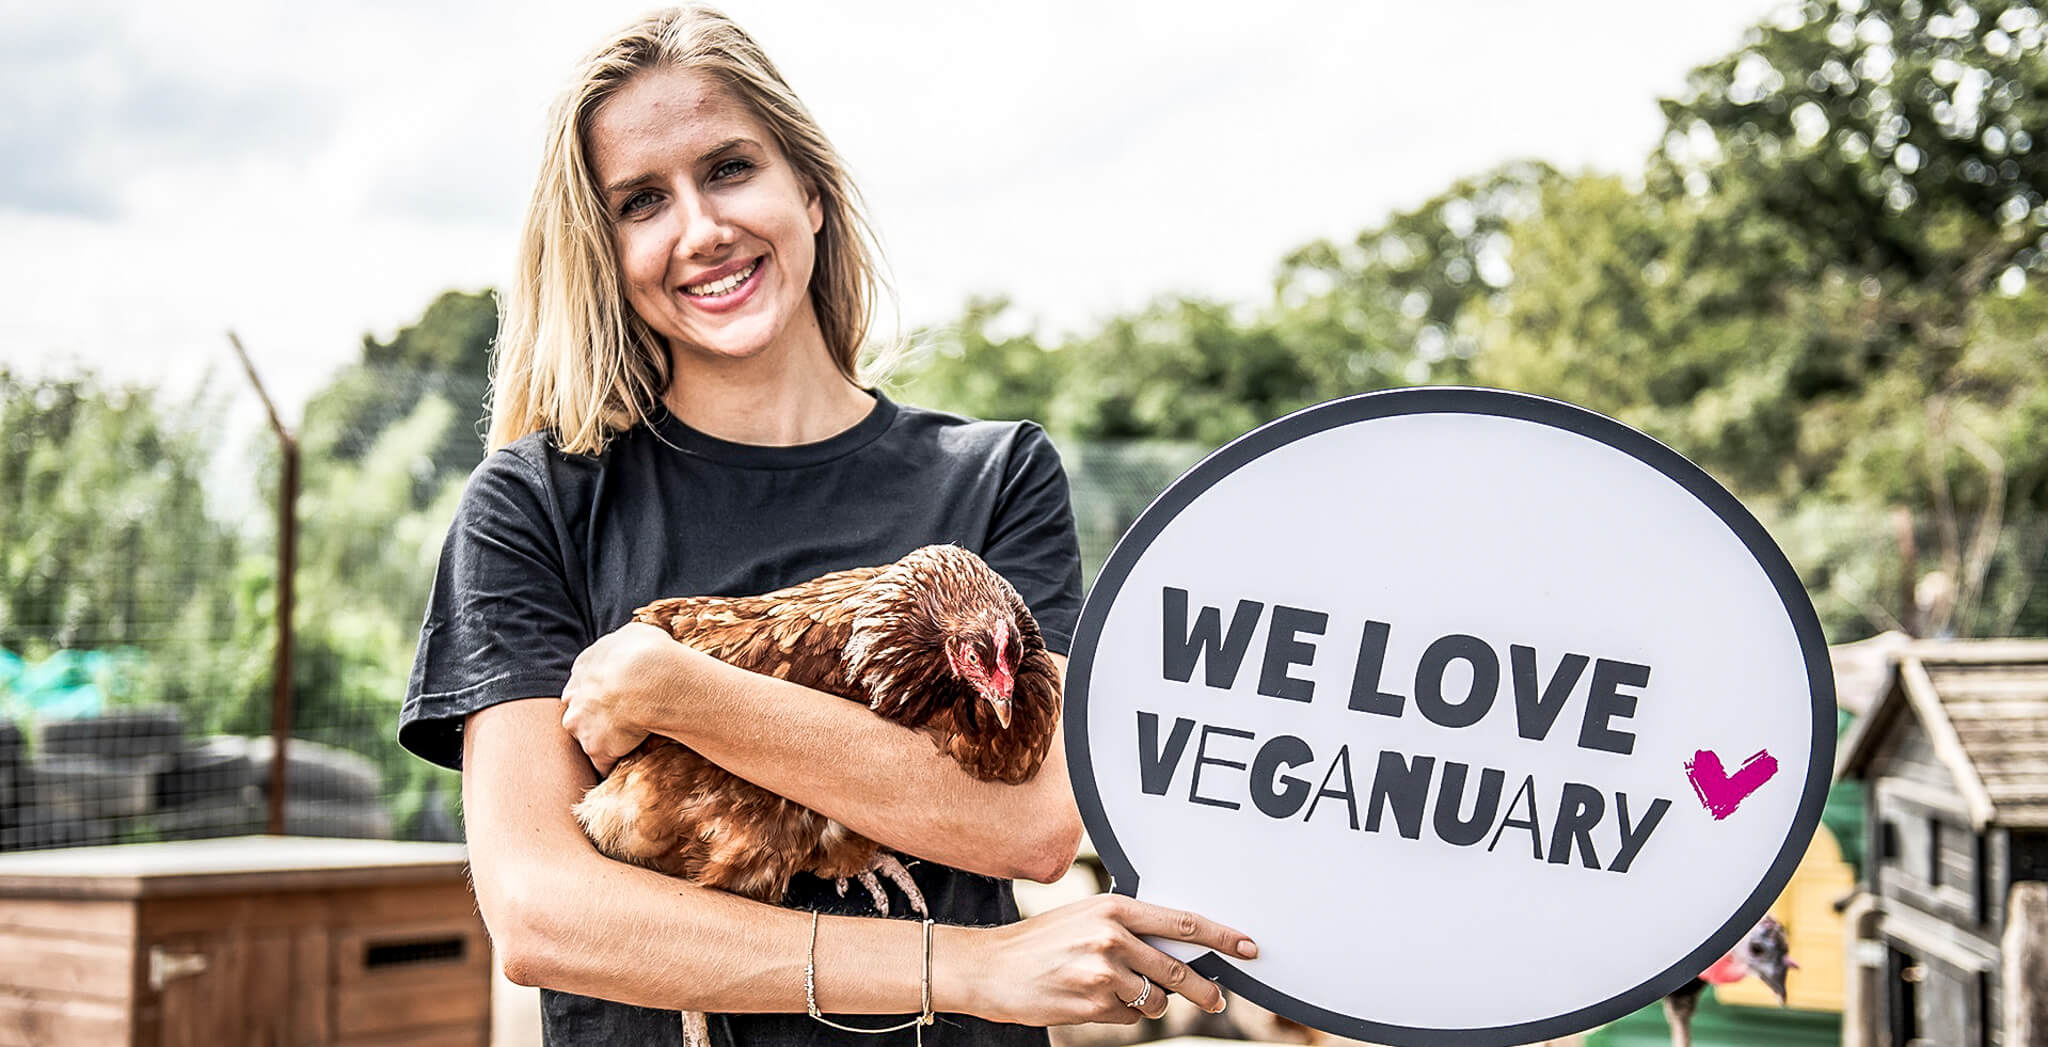 Woman holding chicken and sign "We love Veganuary"